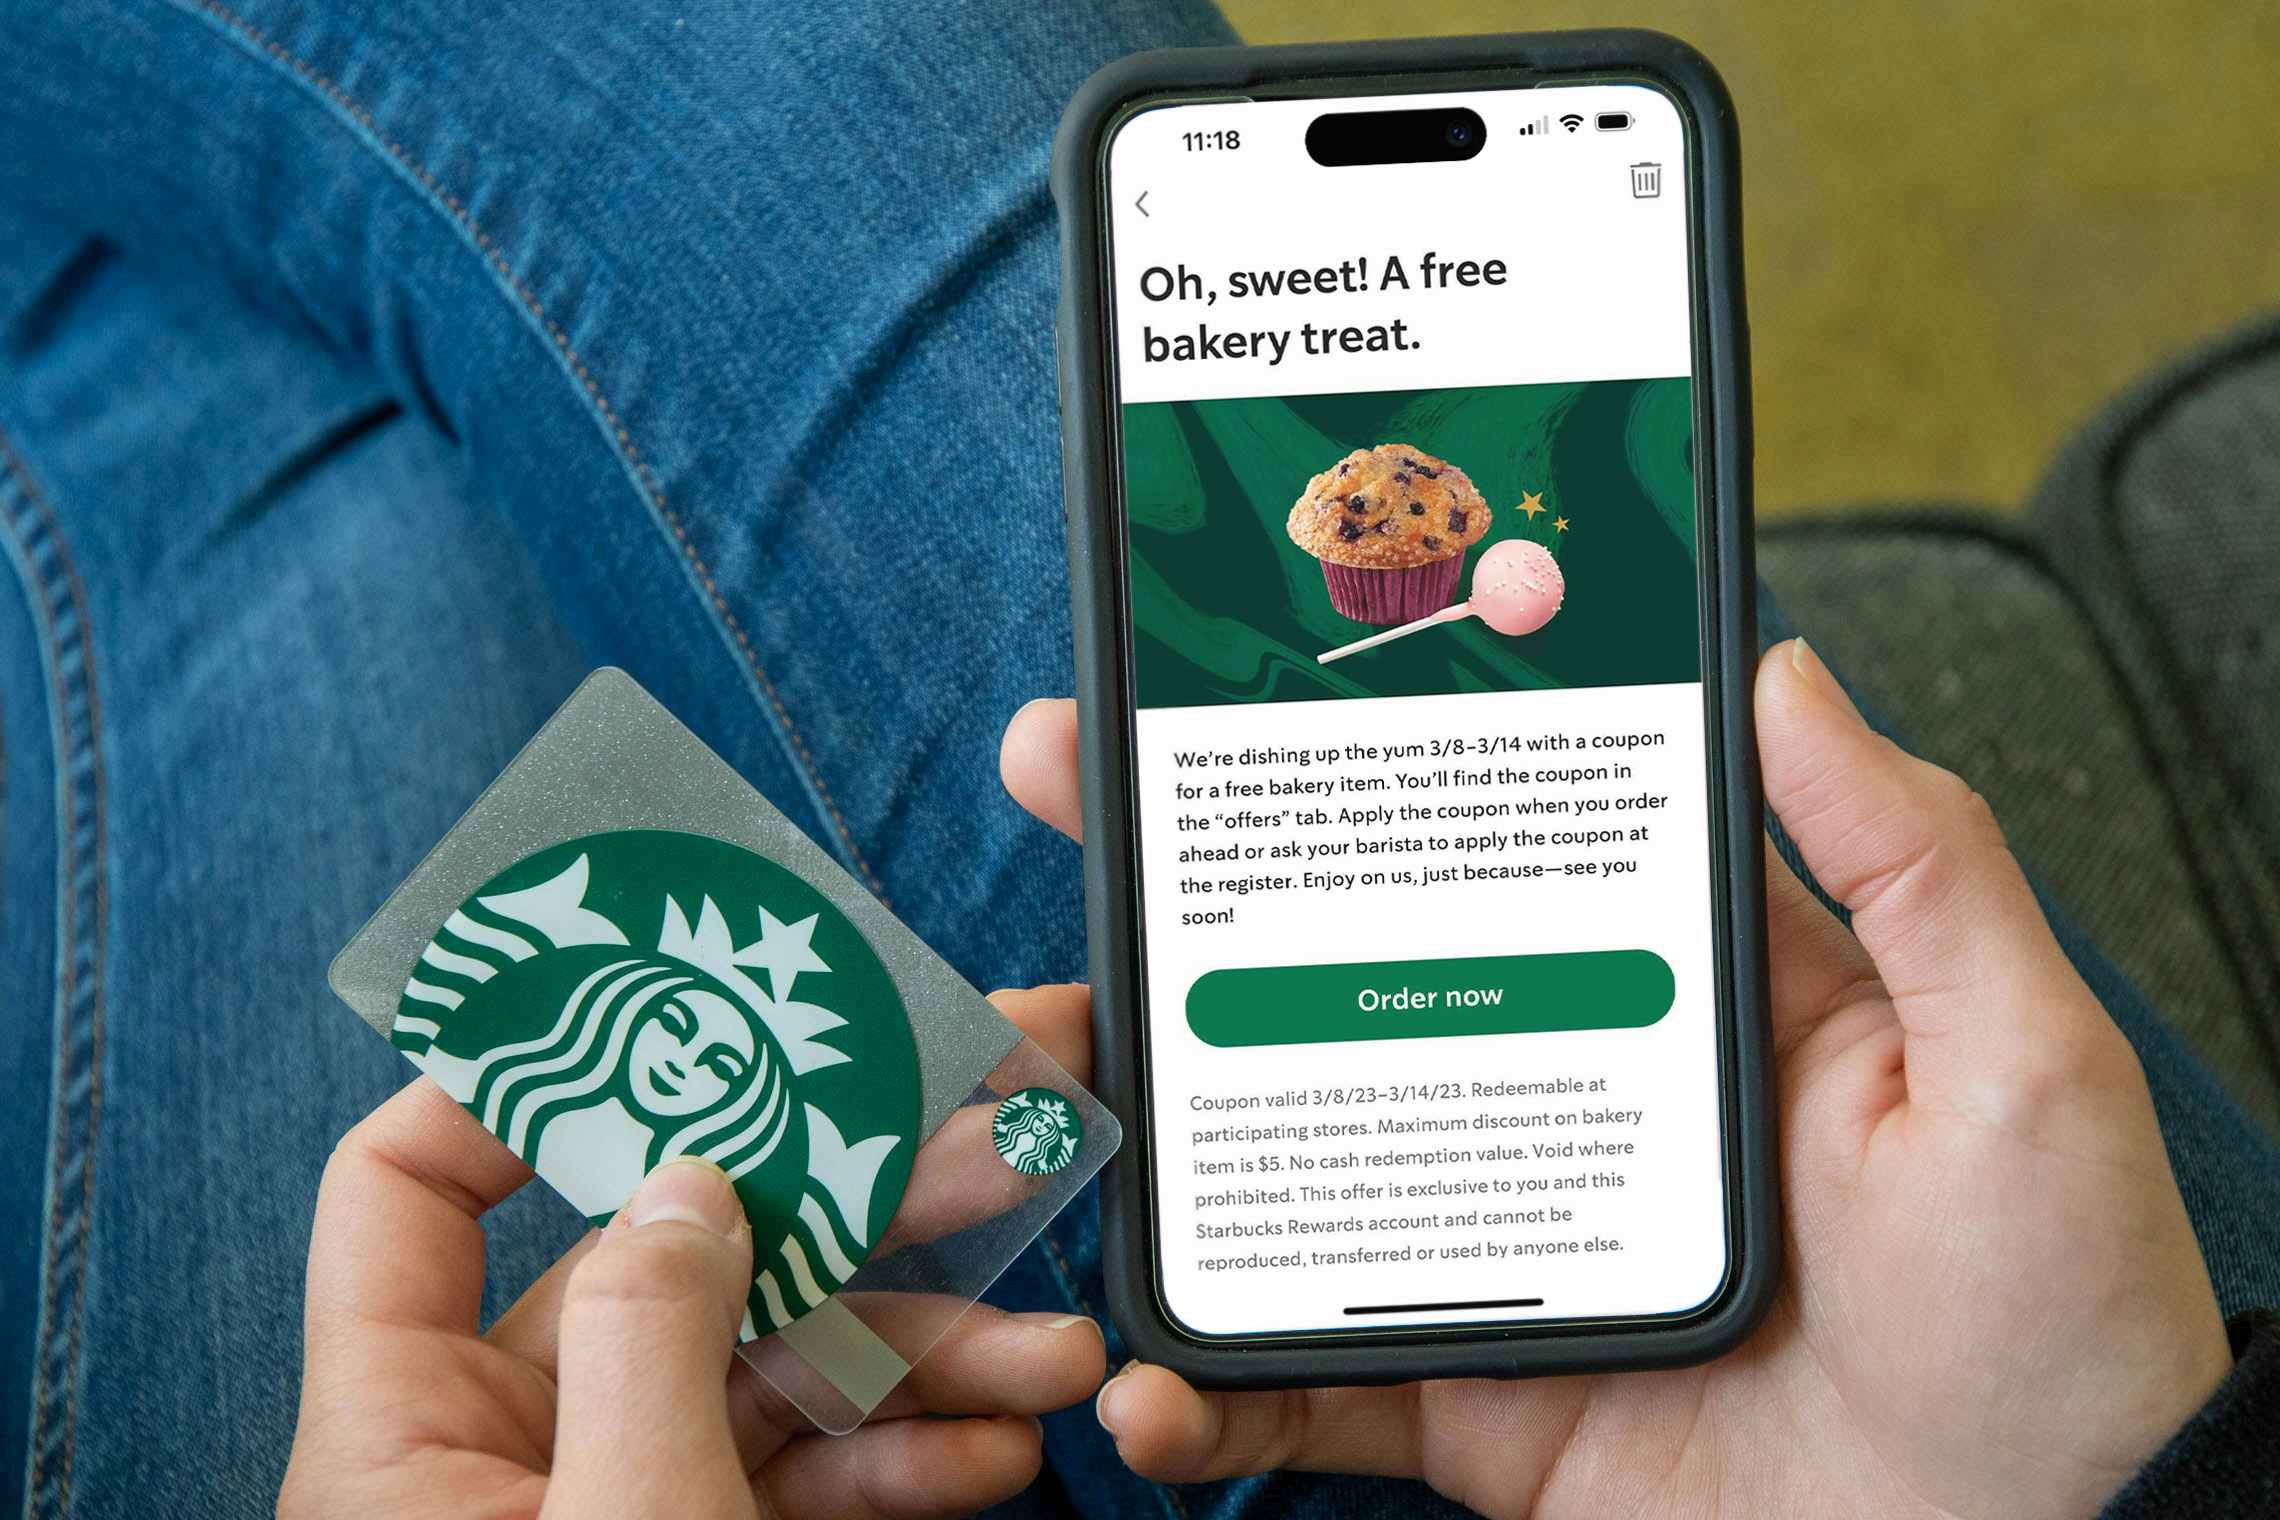 Someone holding a Starbucks card and a phone displaying an offer from Starbucks for a free bakery treat